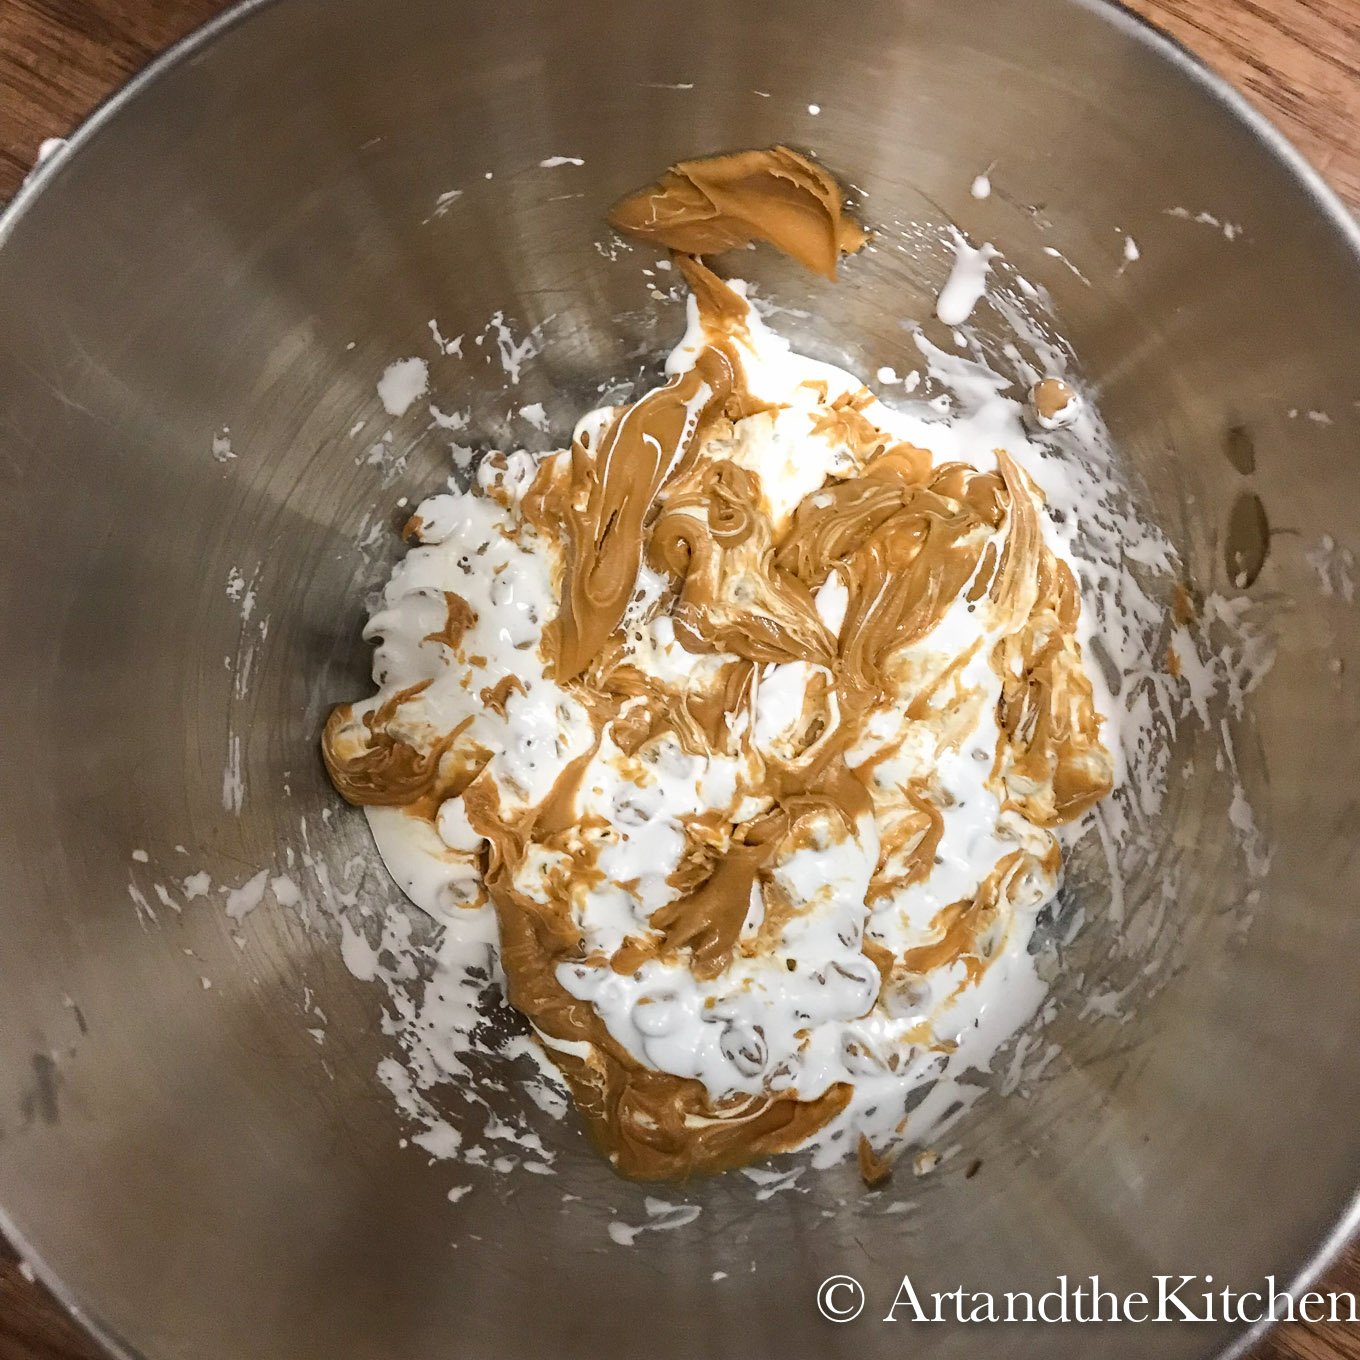 Peanut butter and marshmallow cream in stainless steel mixing bowl.